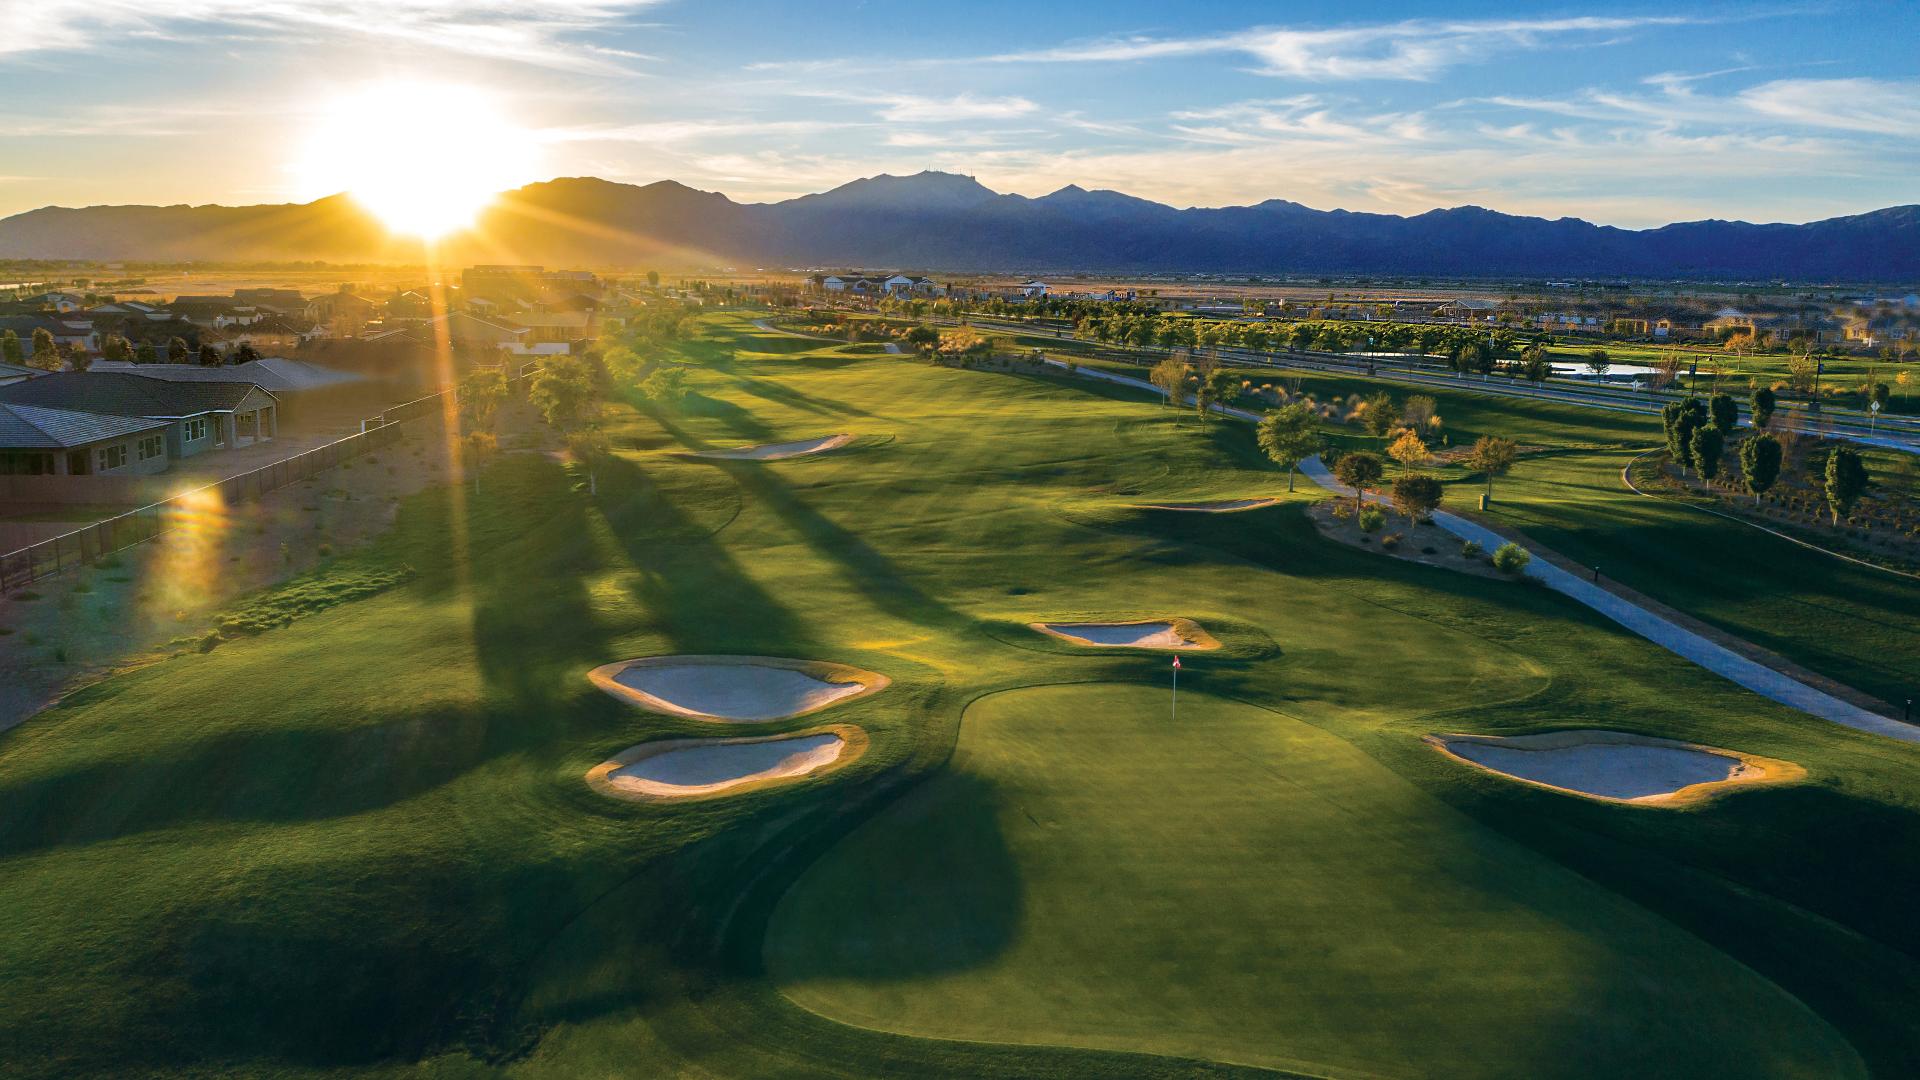 18-hole Nicklaus Design golf course with sweeping views of the White Tank Mountains